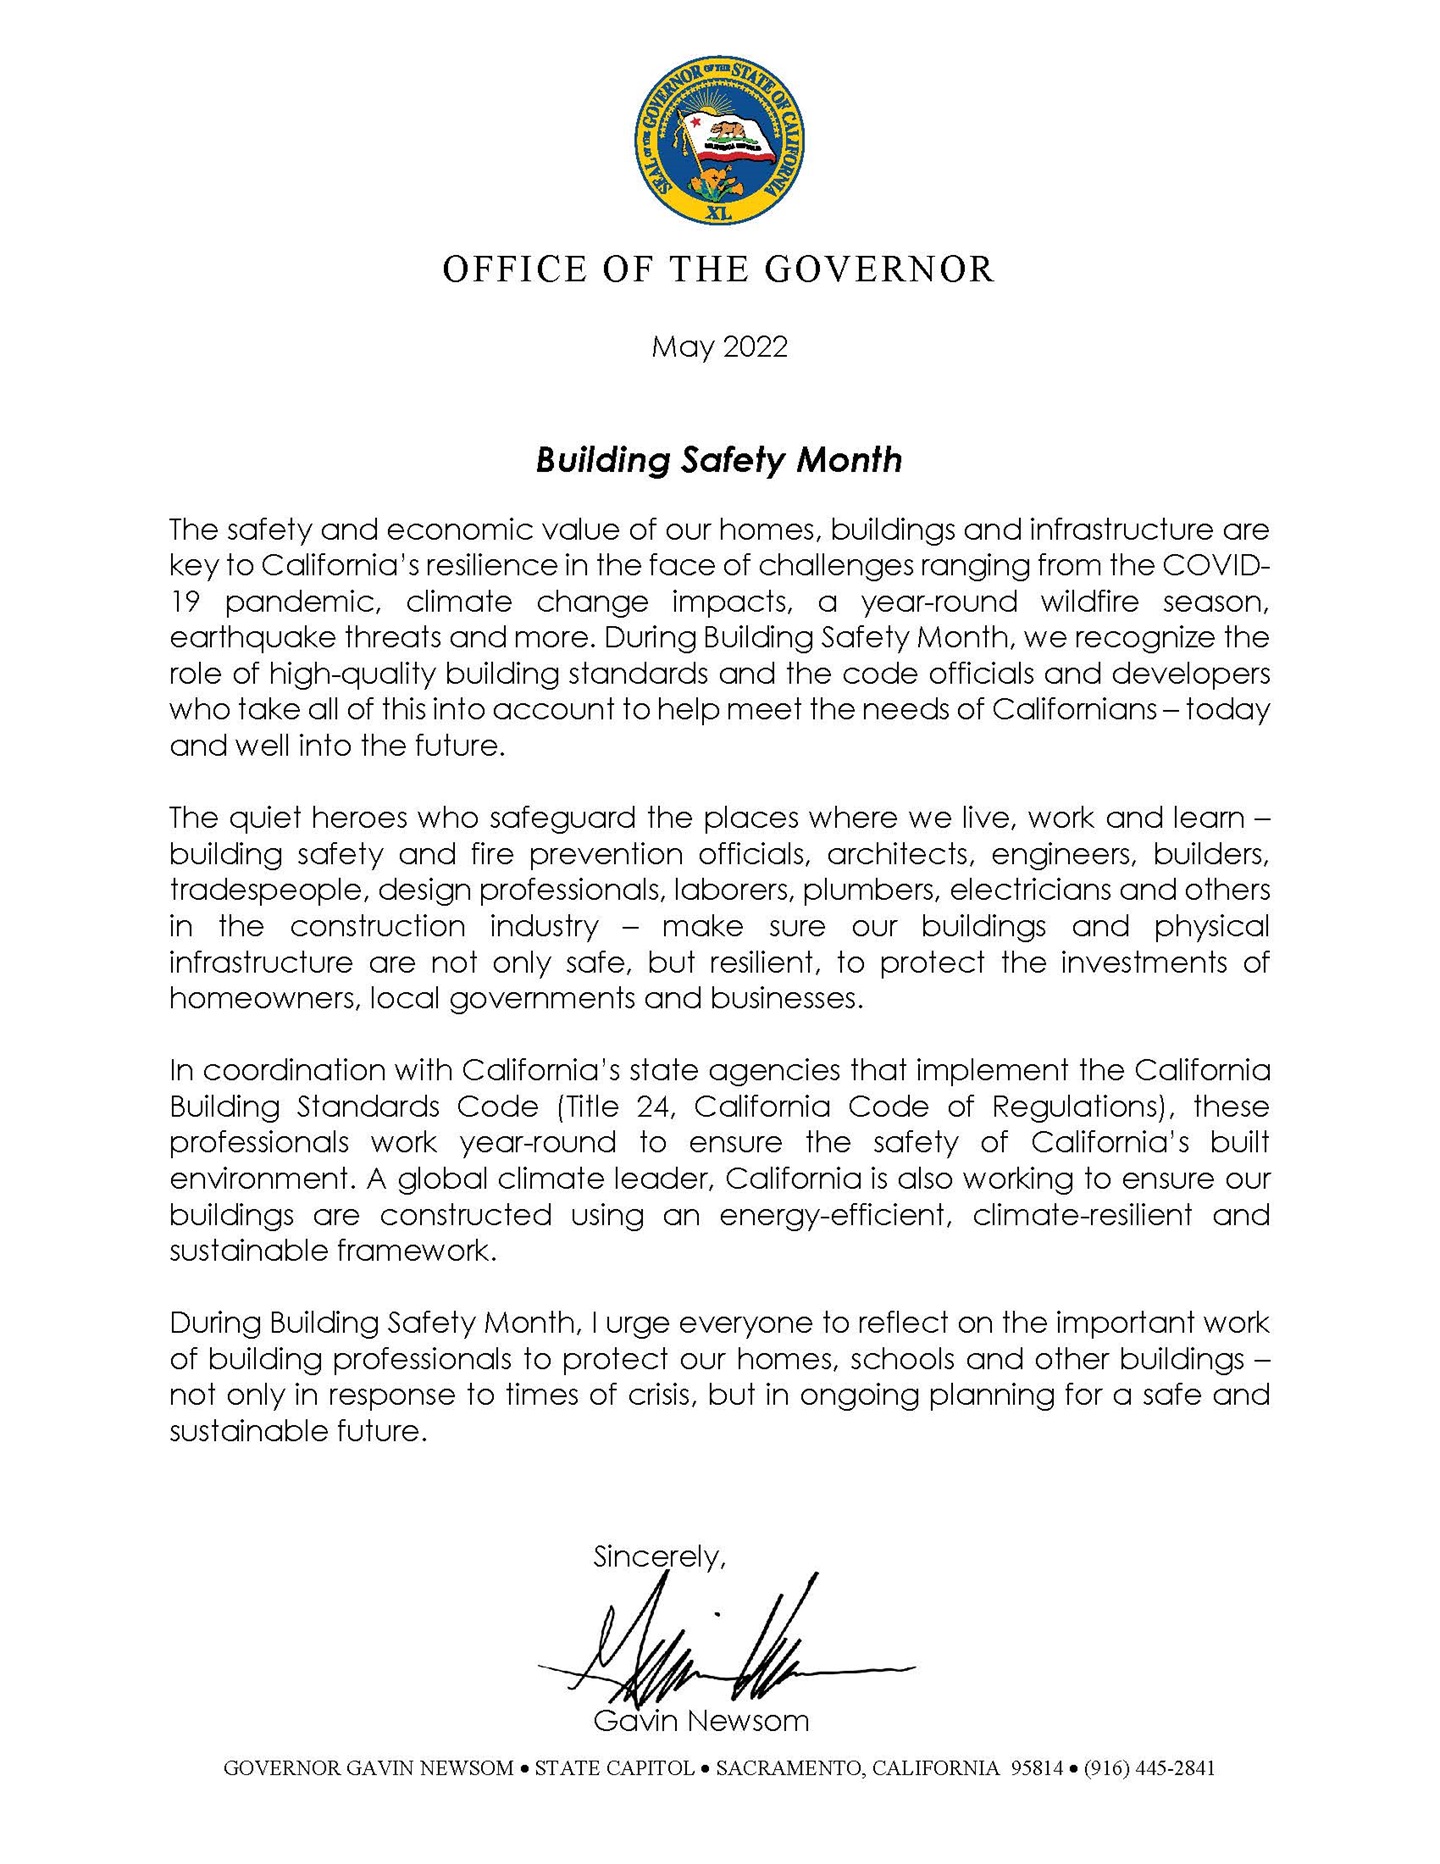 2022 Building Safety Month declaration signed by governor